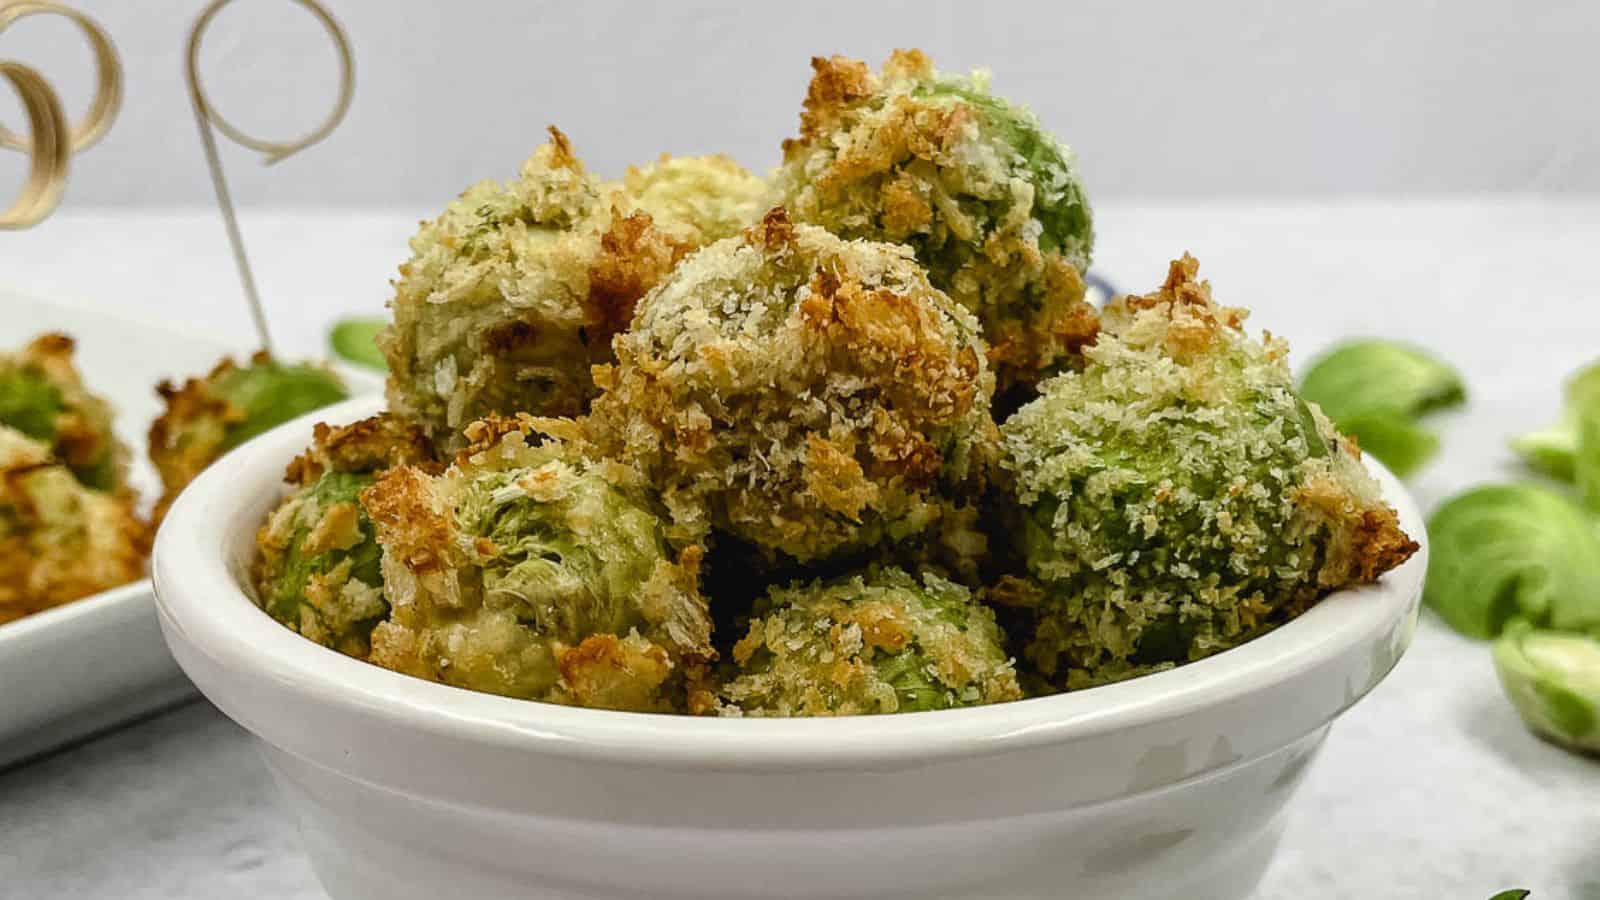 Cheesy Brussel sprouts in a white bowl.